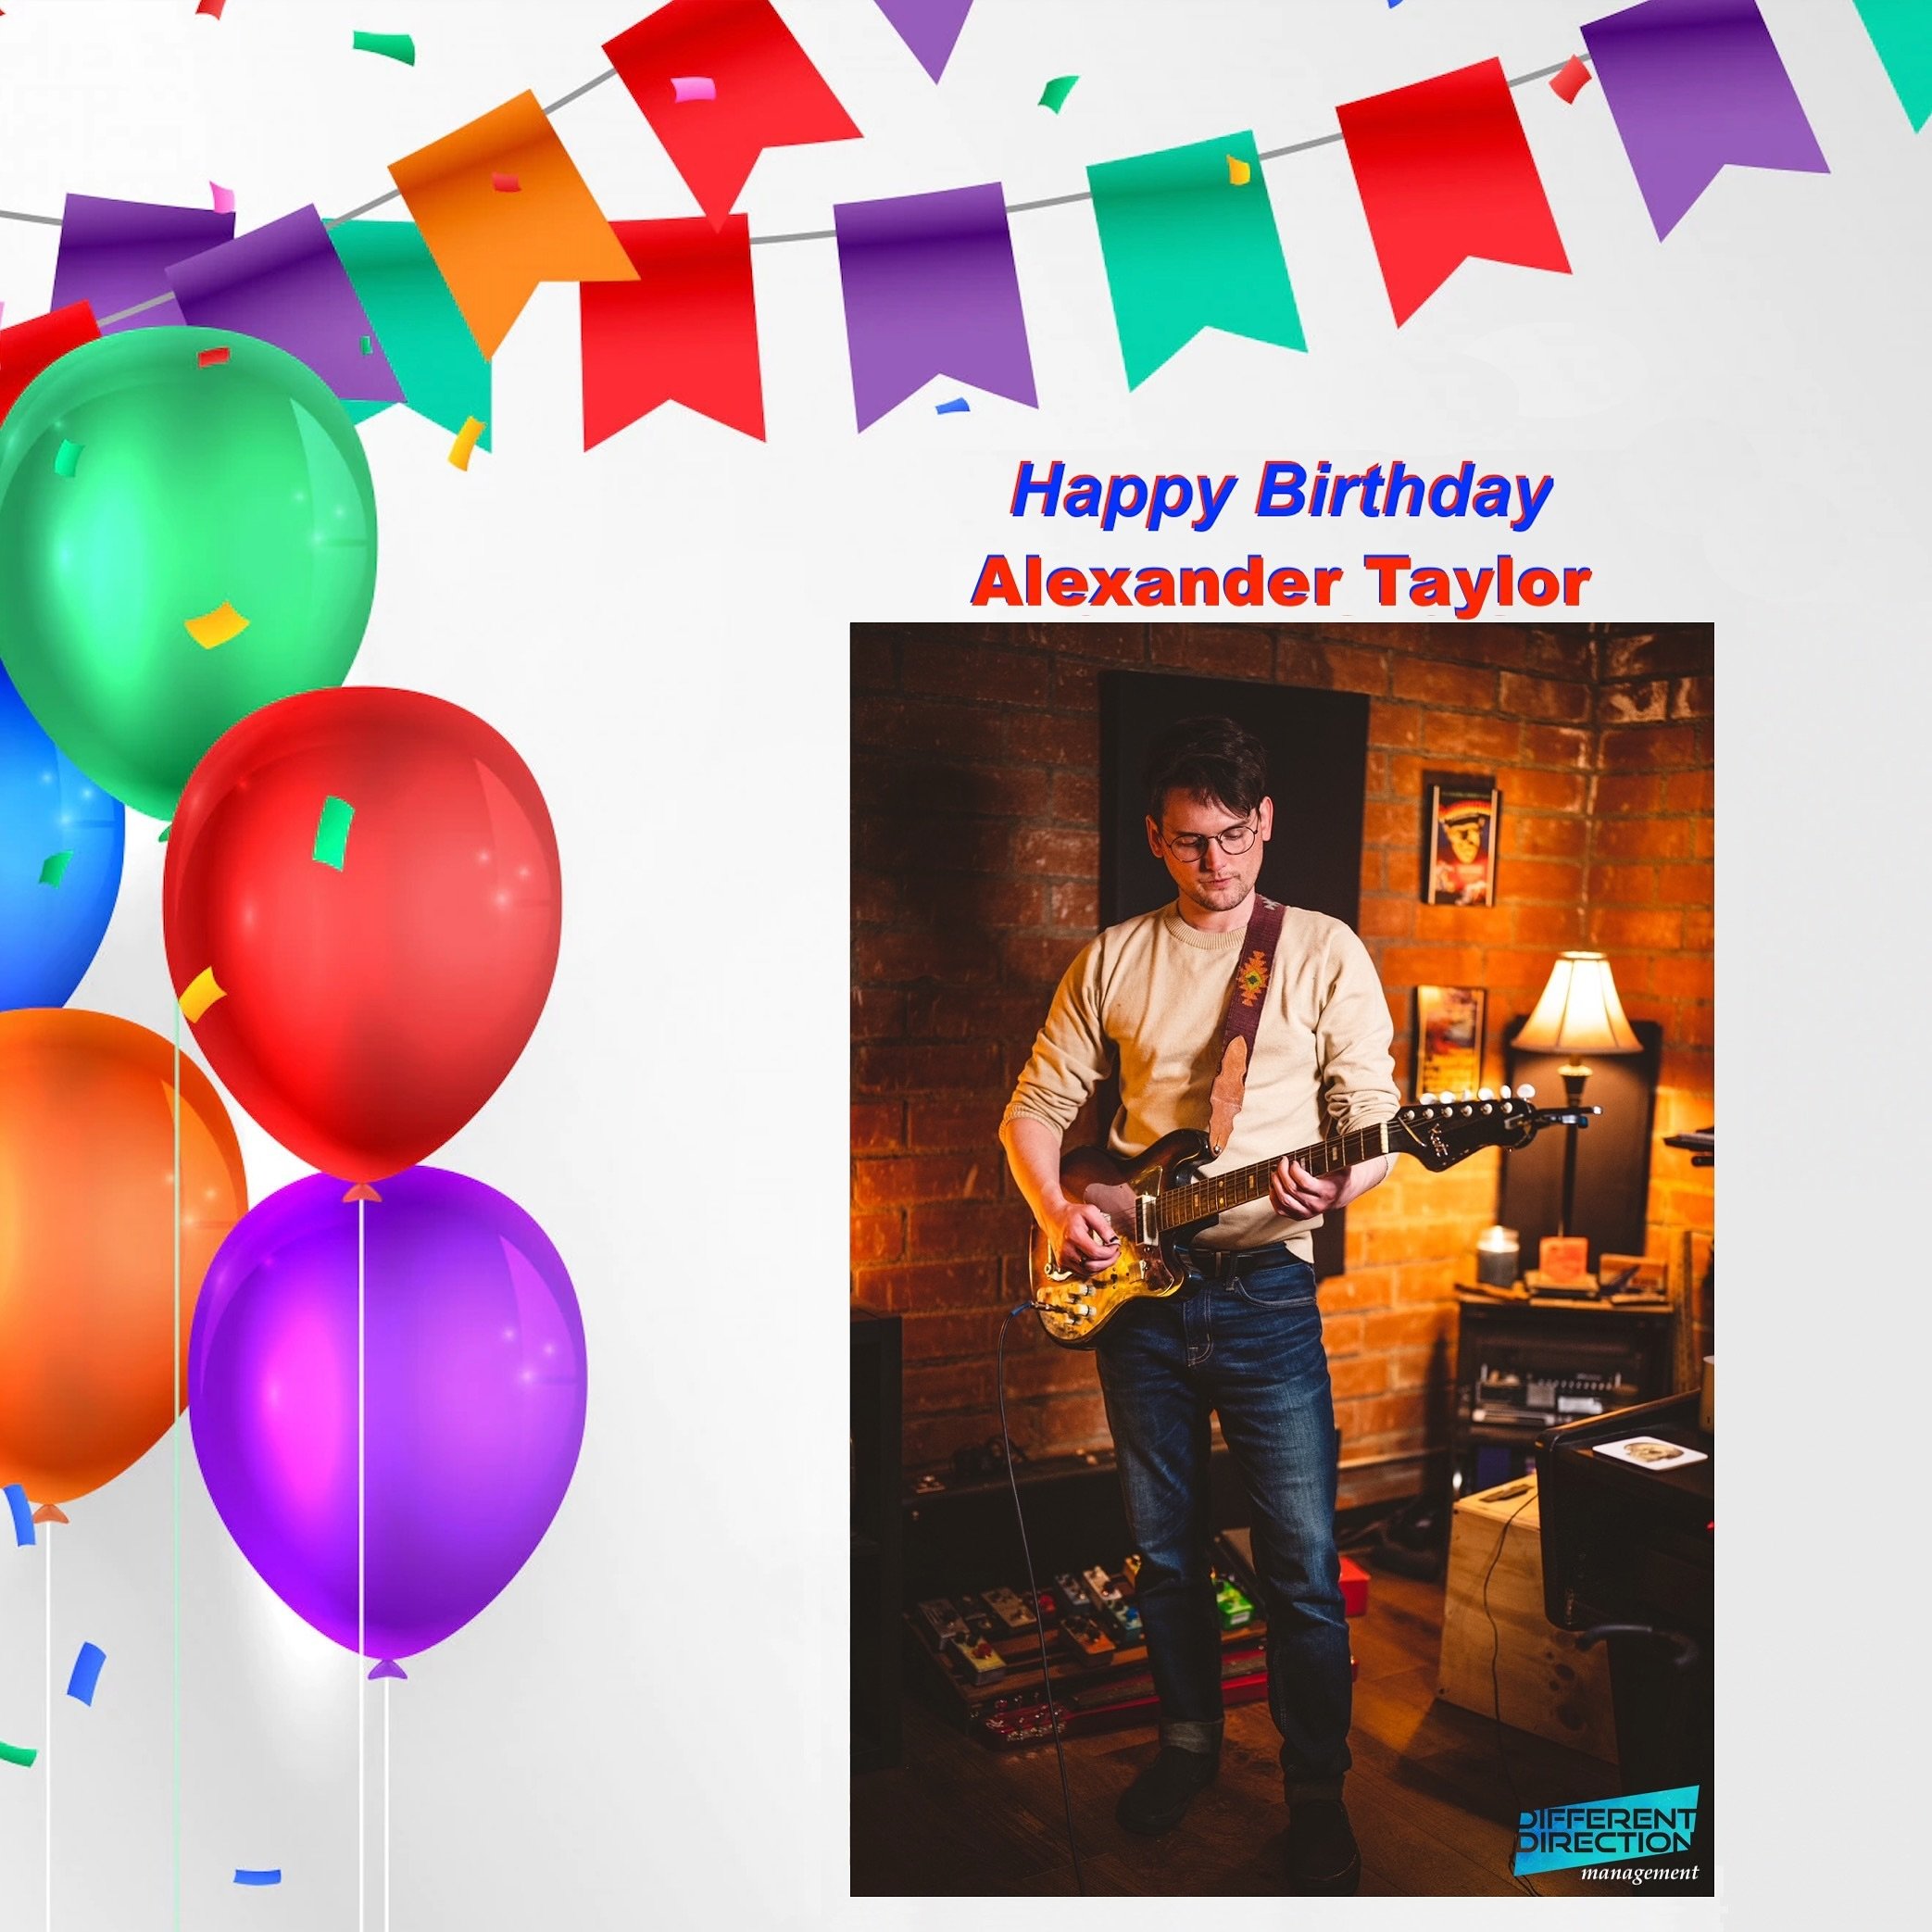 April 11th is a very special day as we have 3 birthdays to celebrate starting with Alexander Taylor Composer! He&rsquo;s the mastermind composer behind Paramount+&rsquo;s UNKNOWN DIMENSION, SCREAM QUEEN MY NIGHTMARE ON ELM STREET and the just release